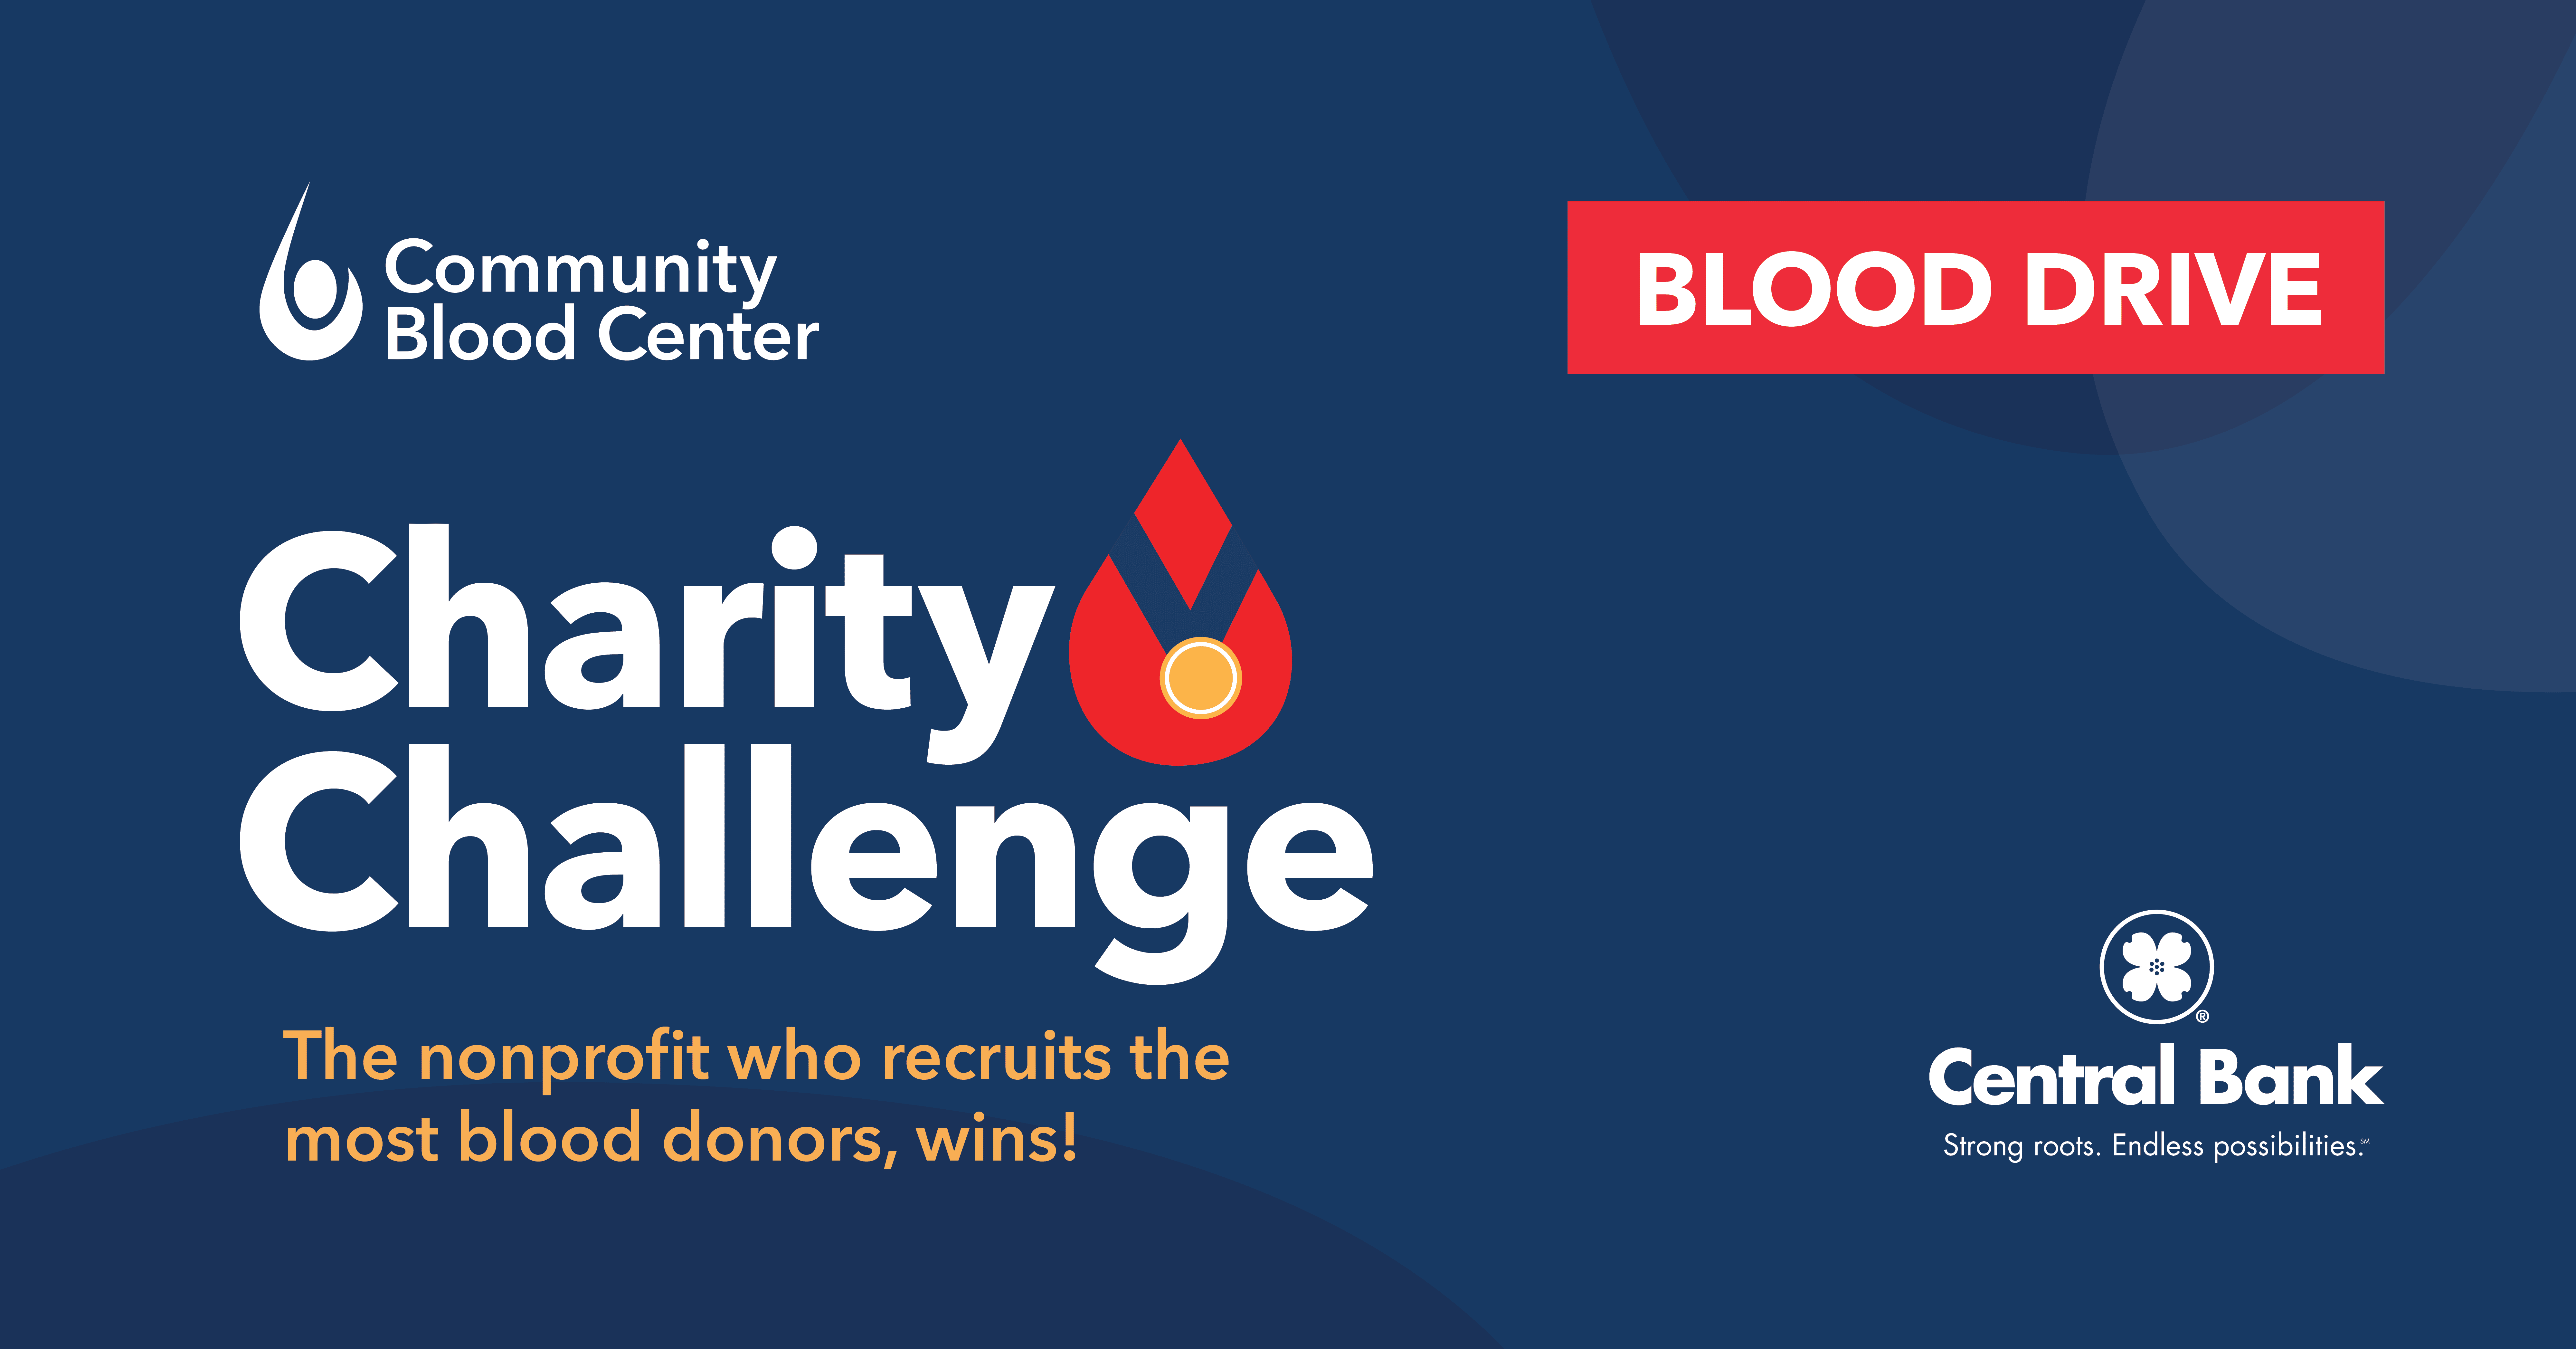 Sign up here to donate blood and help Feed Northland Kids win $1000 https://donate.savealifenow.org/donor/schedules/drive_schedule/82249